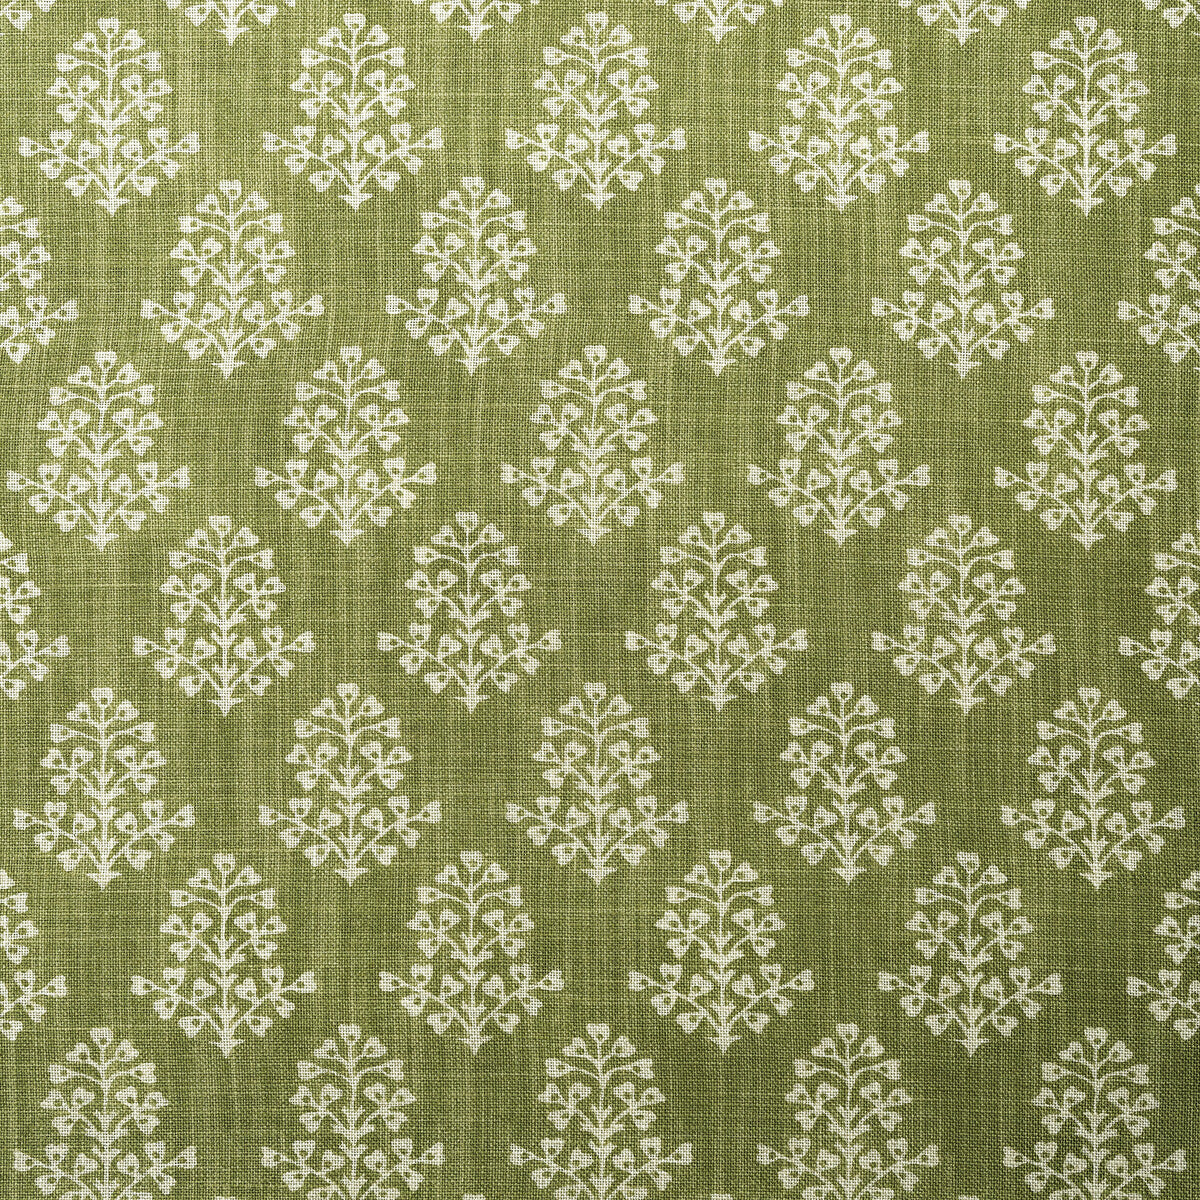 Sprig fabric in leaf color - pattern AM100384.3.0 - by Kravet Couture in the Andrew Martin Garden Path collection